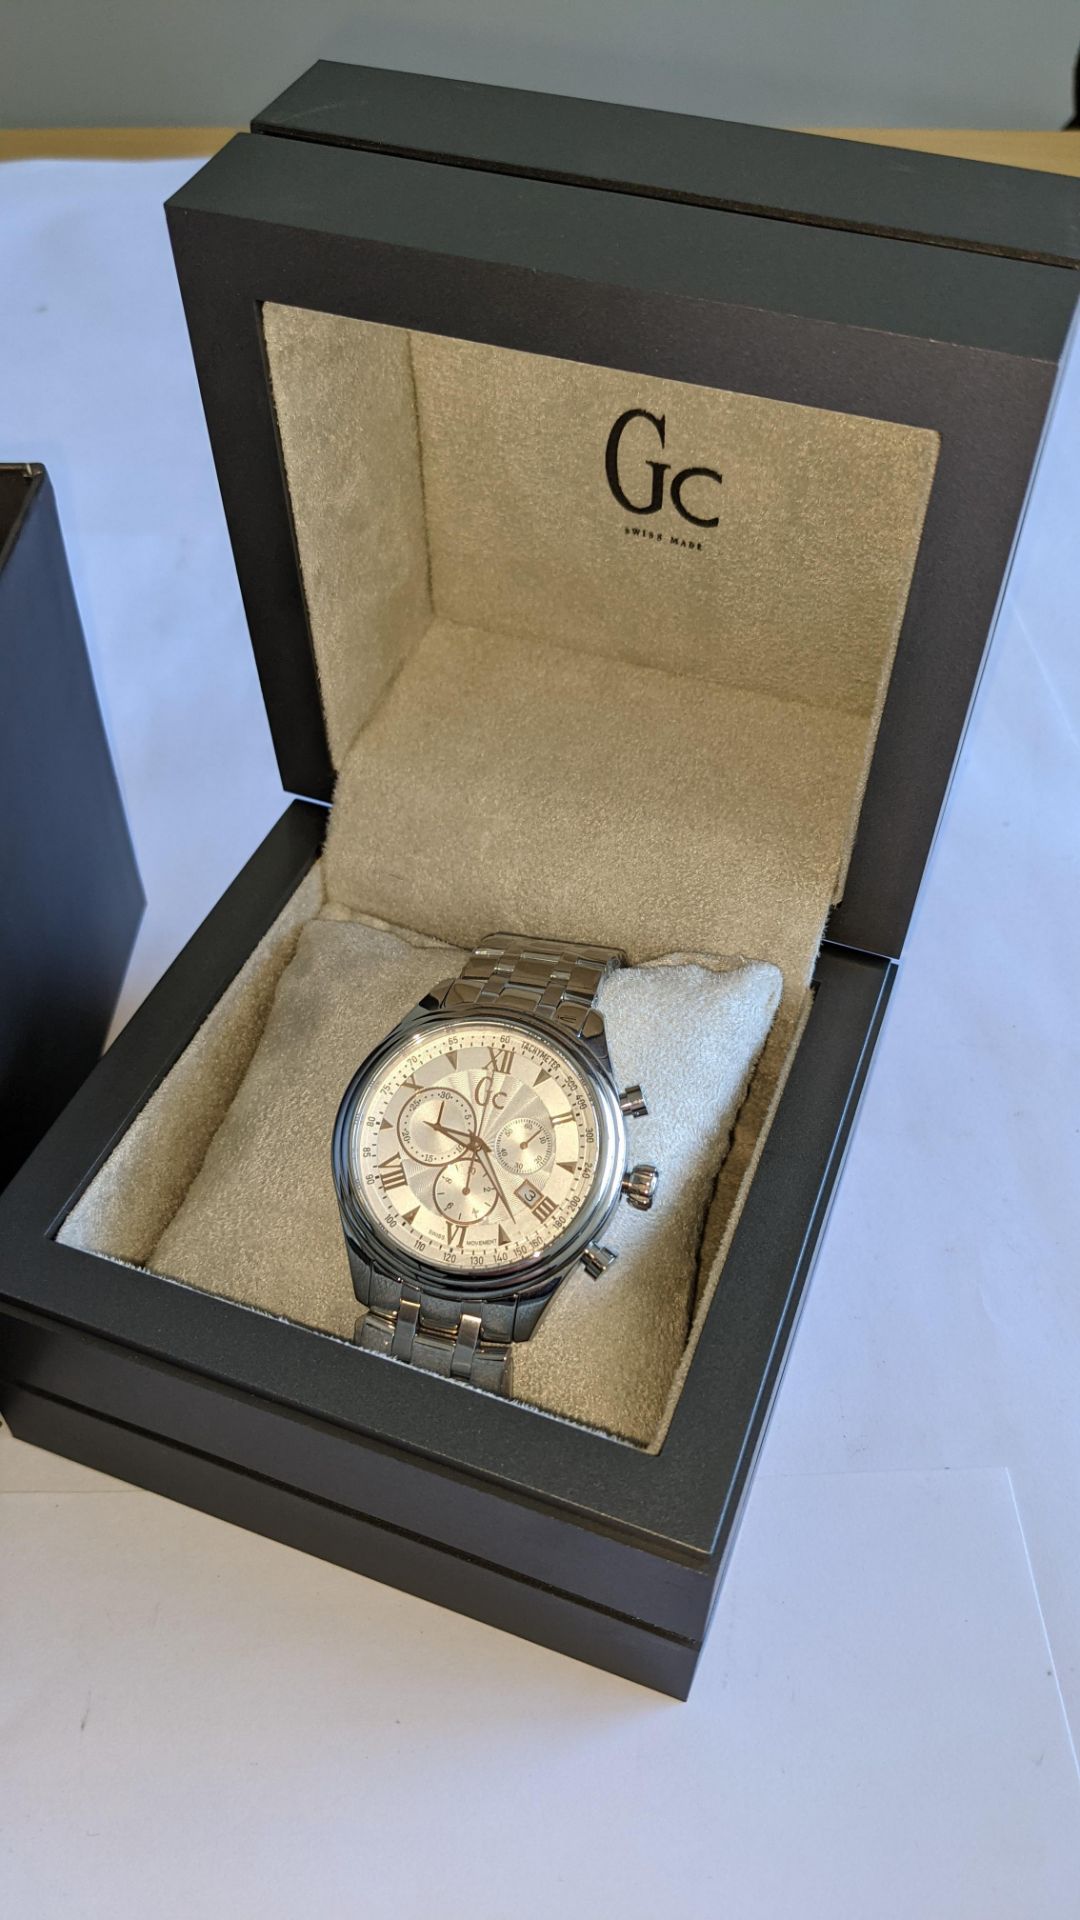 GC (Guess Collection) watch with GC branded box, product code Y04006G1, 100M water resistant, in sta - Image 5 of 17